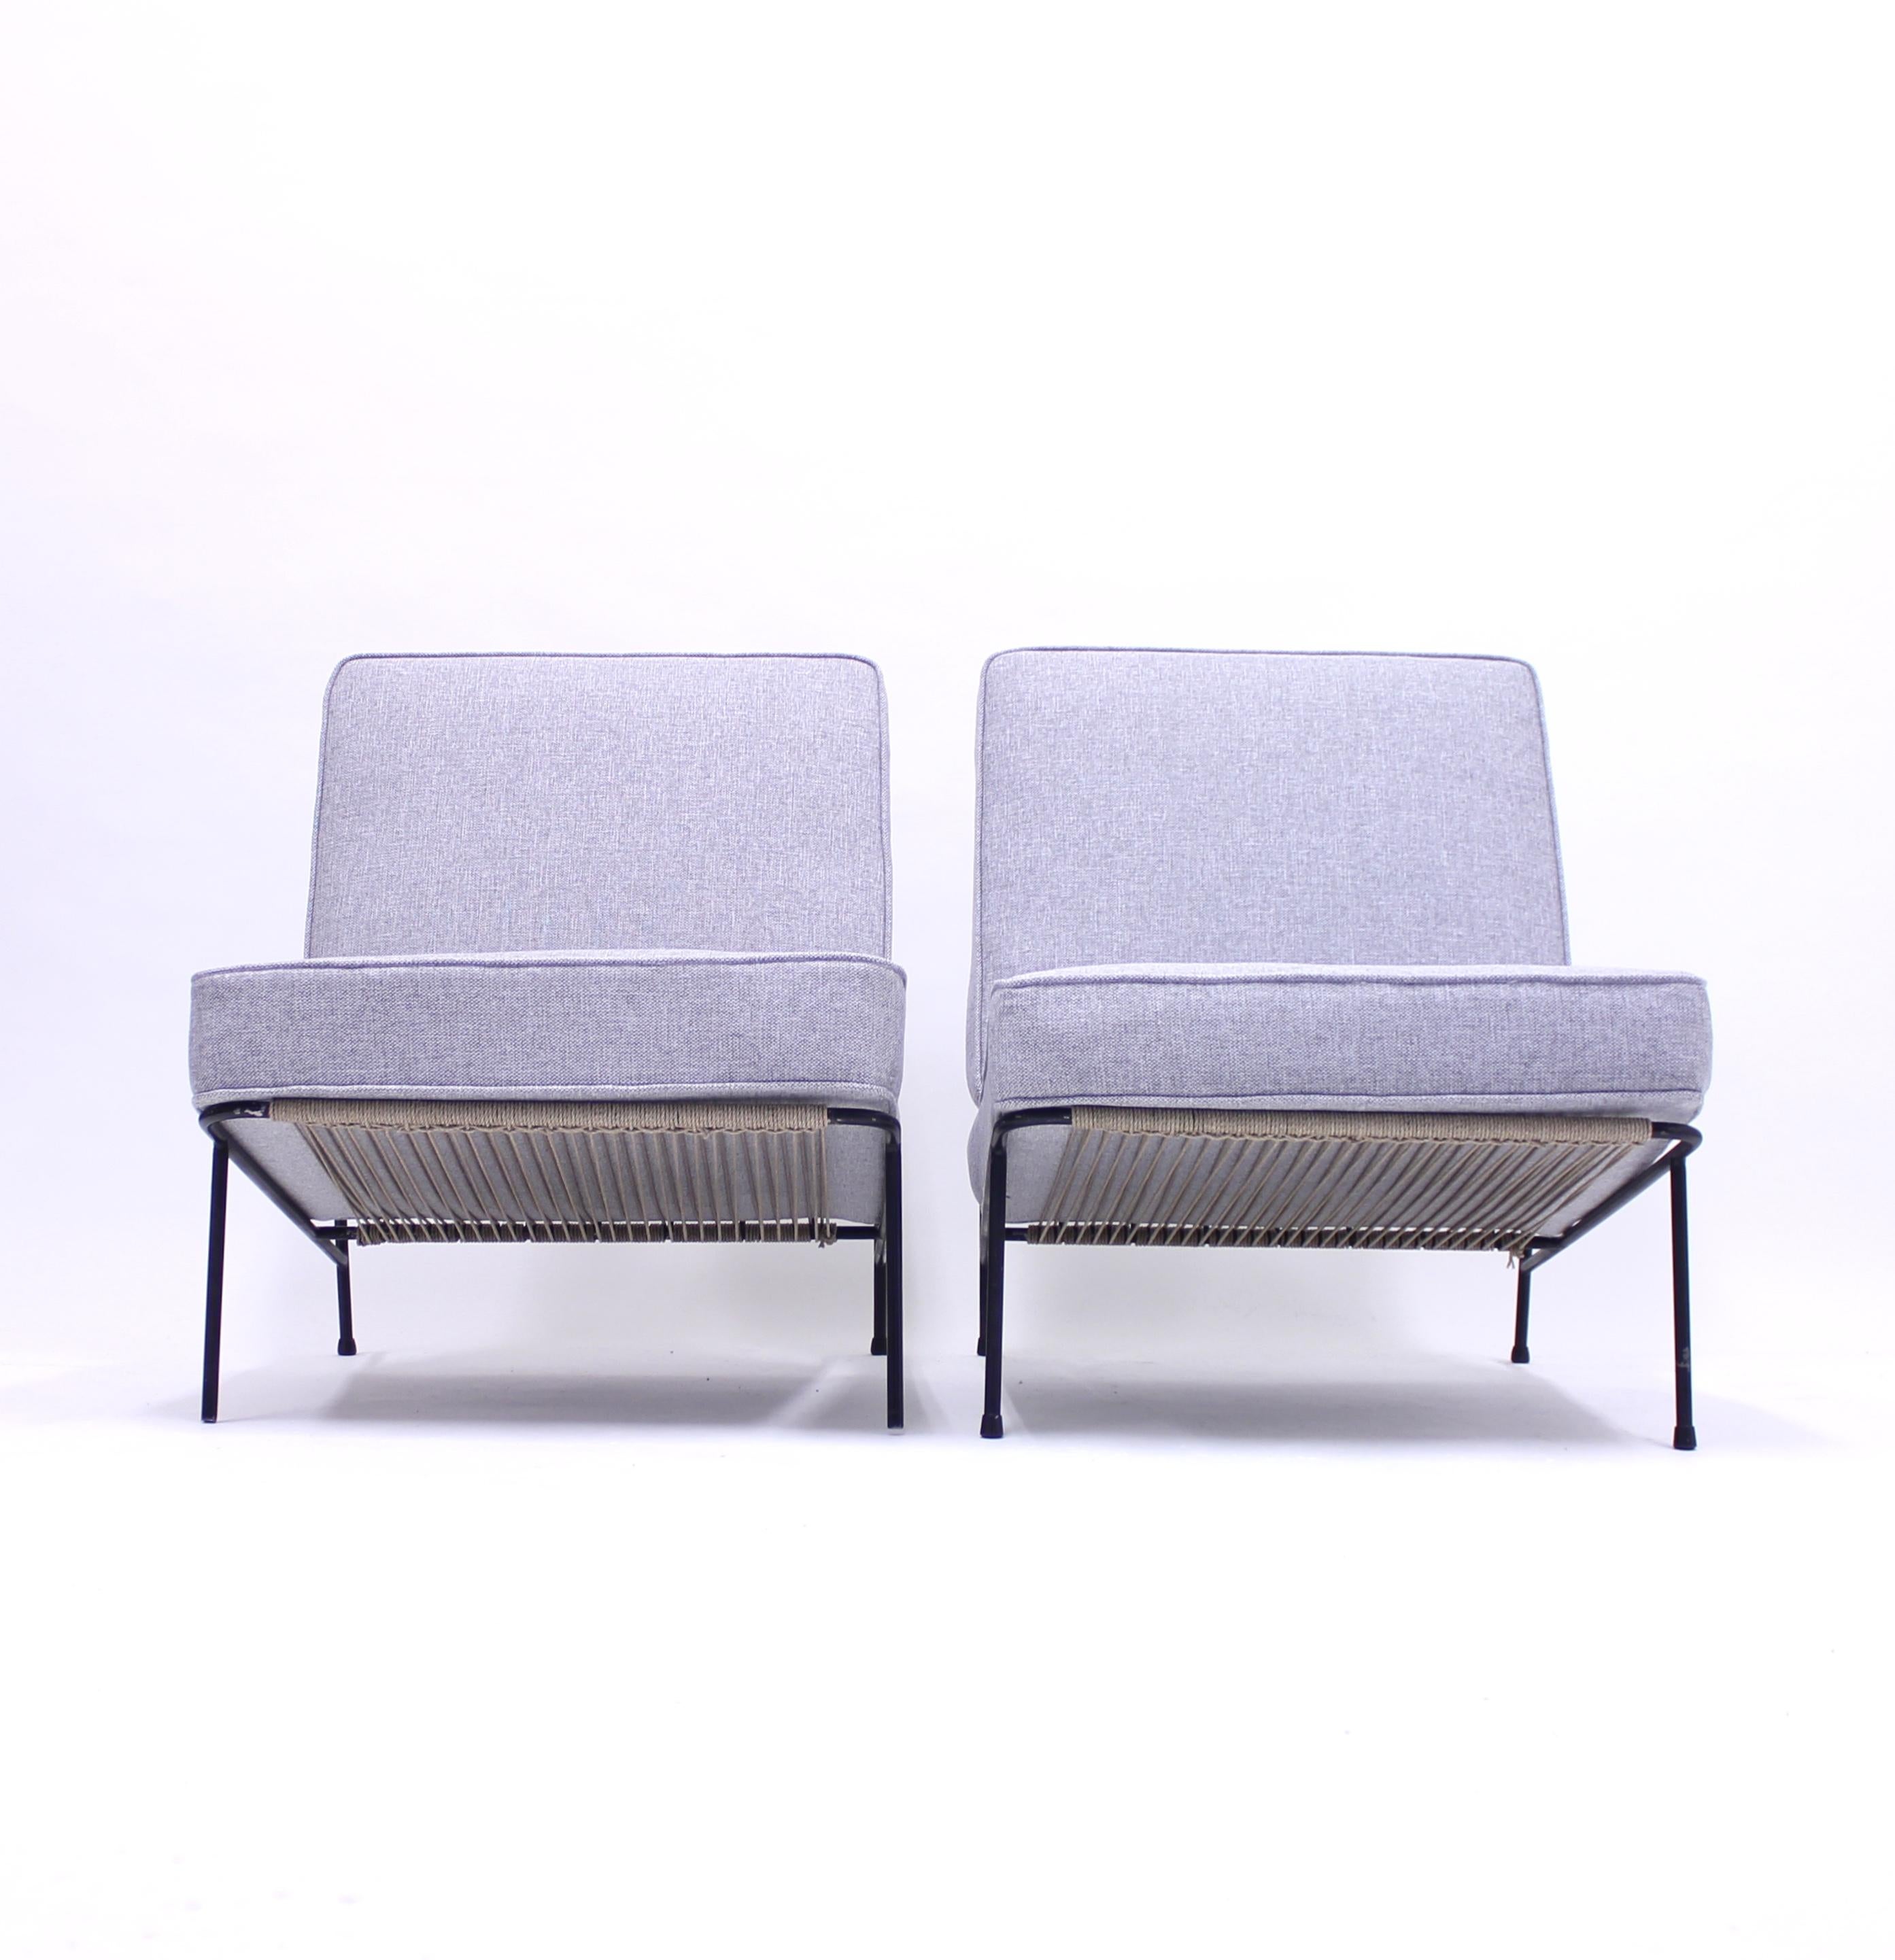 Alf Svensson, Pair of Domus Lounge Chairs, DUX, 1950s For Sale 1